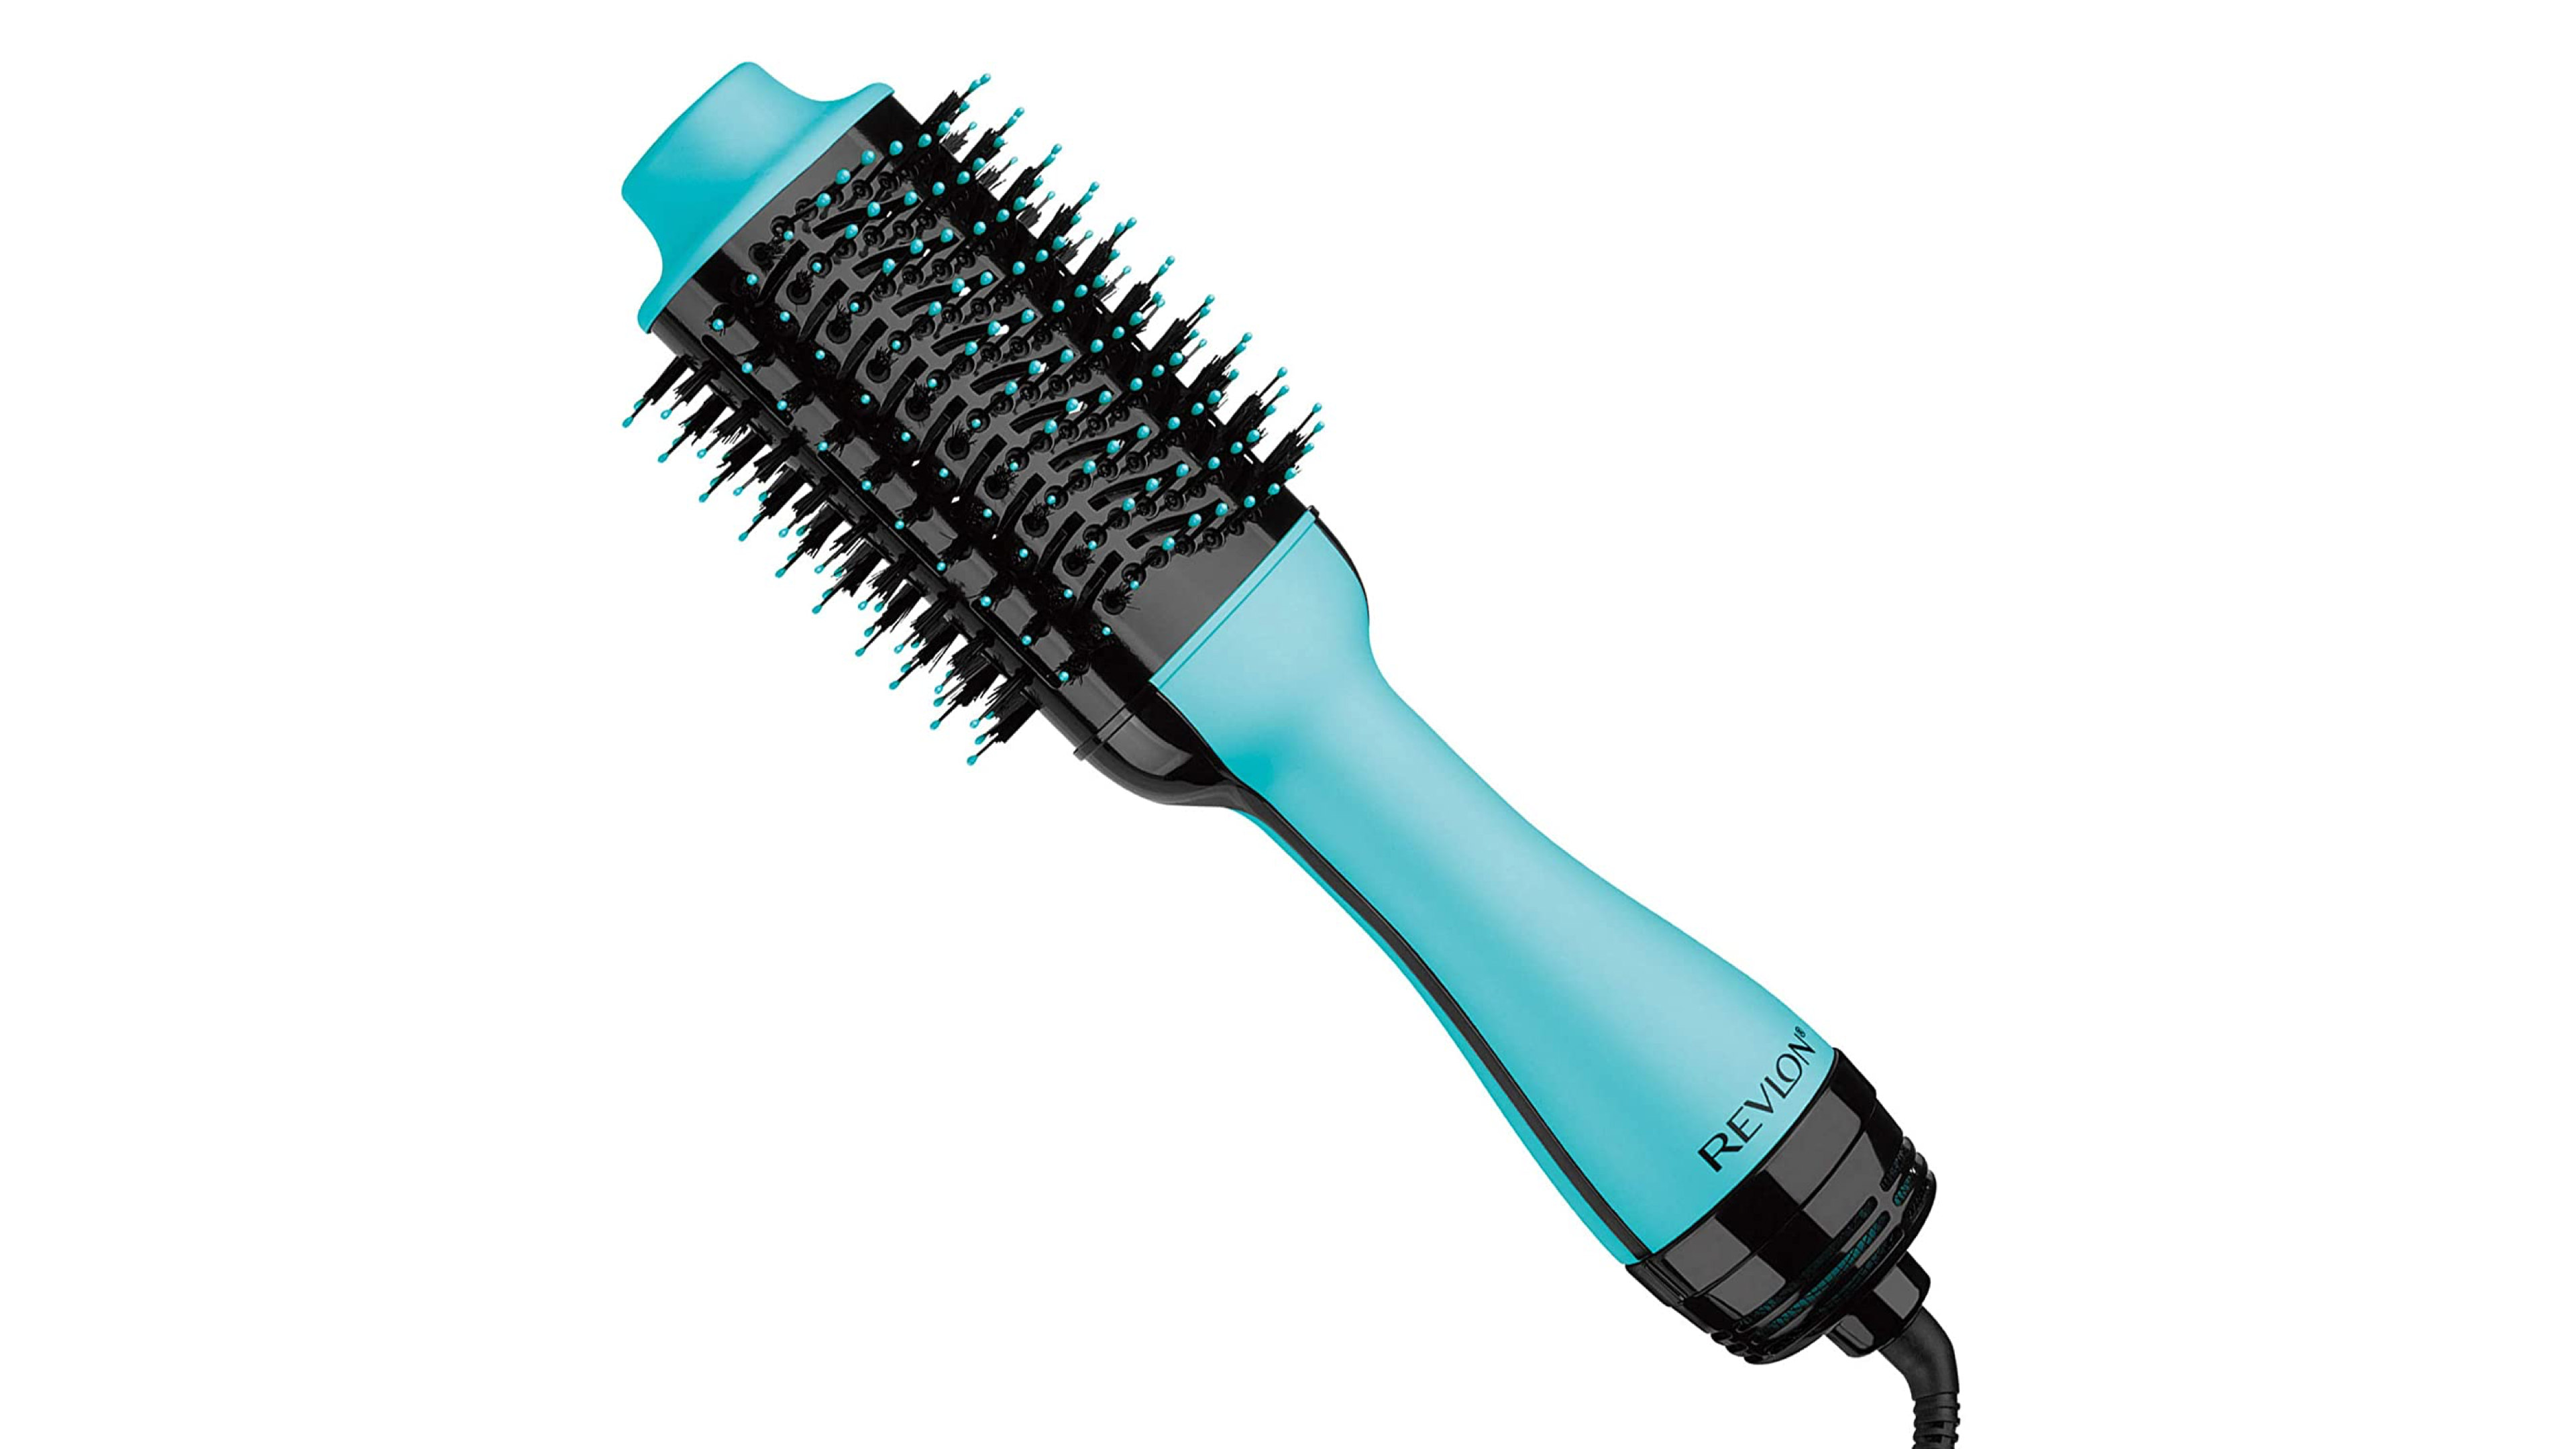 blow-dryer hairbrush that can give you salon-like blowouts